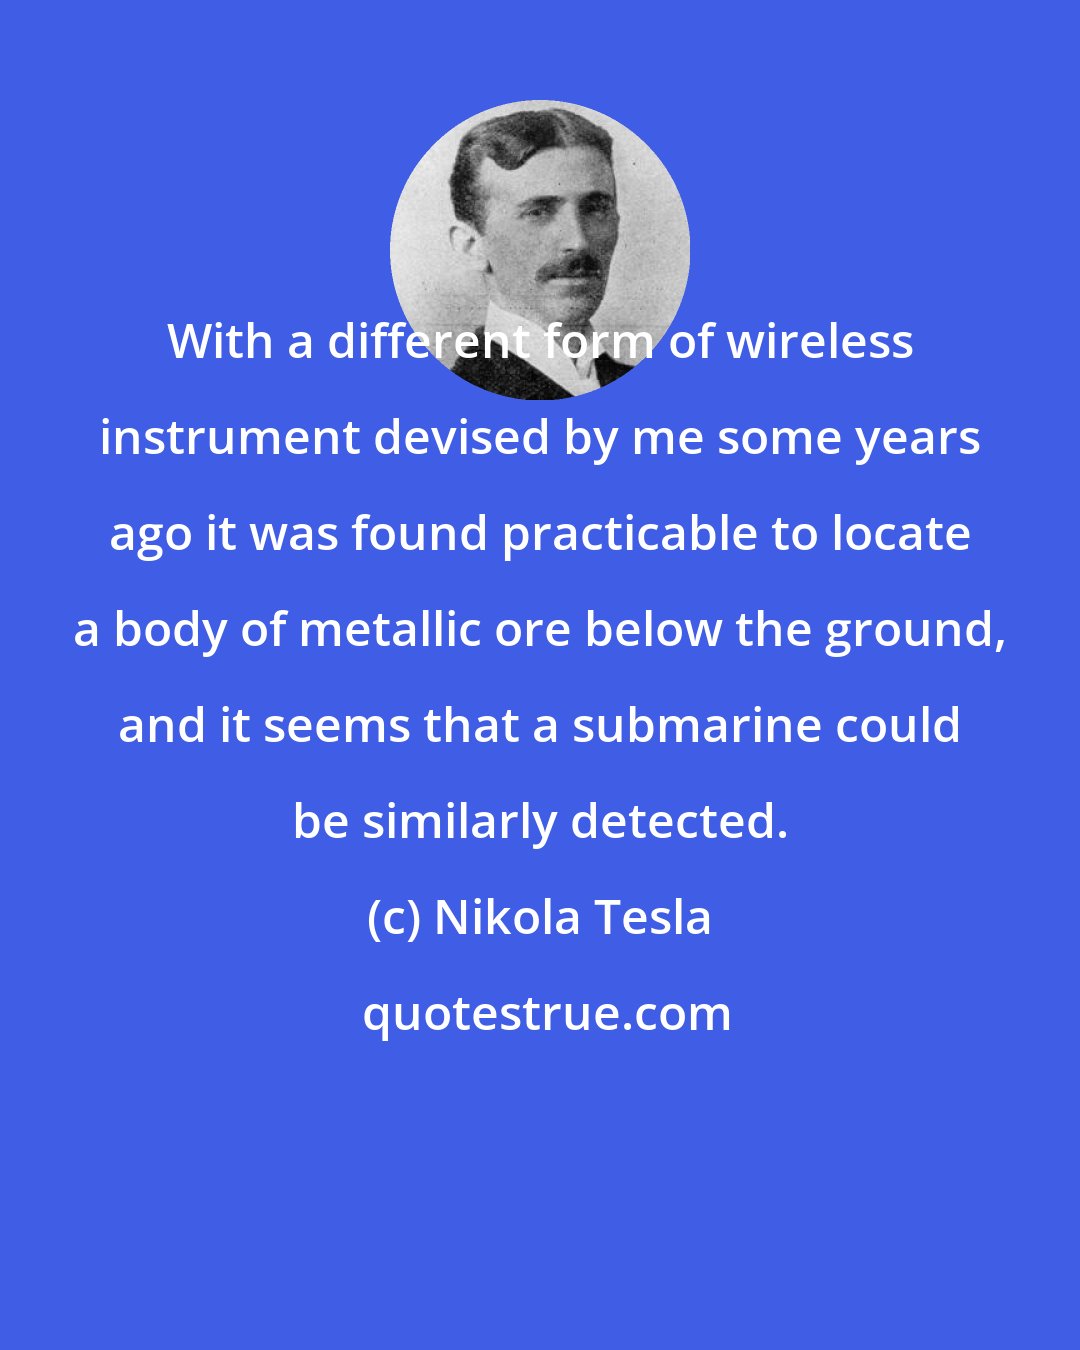 Nikola Tesla: With a different form of wireless instrument devised by me some years ago it was found practicable to locate a body of metallic ore below the ground, and it seems that a submarine could be similarly detected.